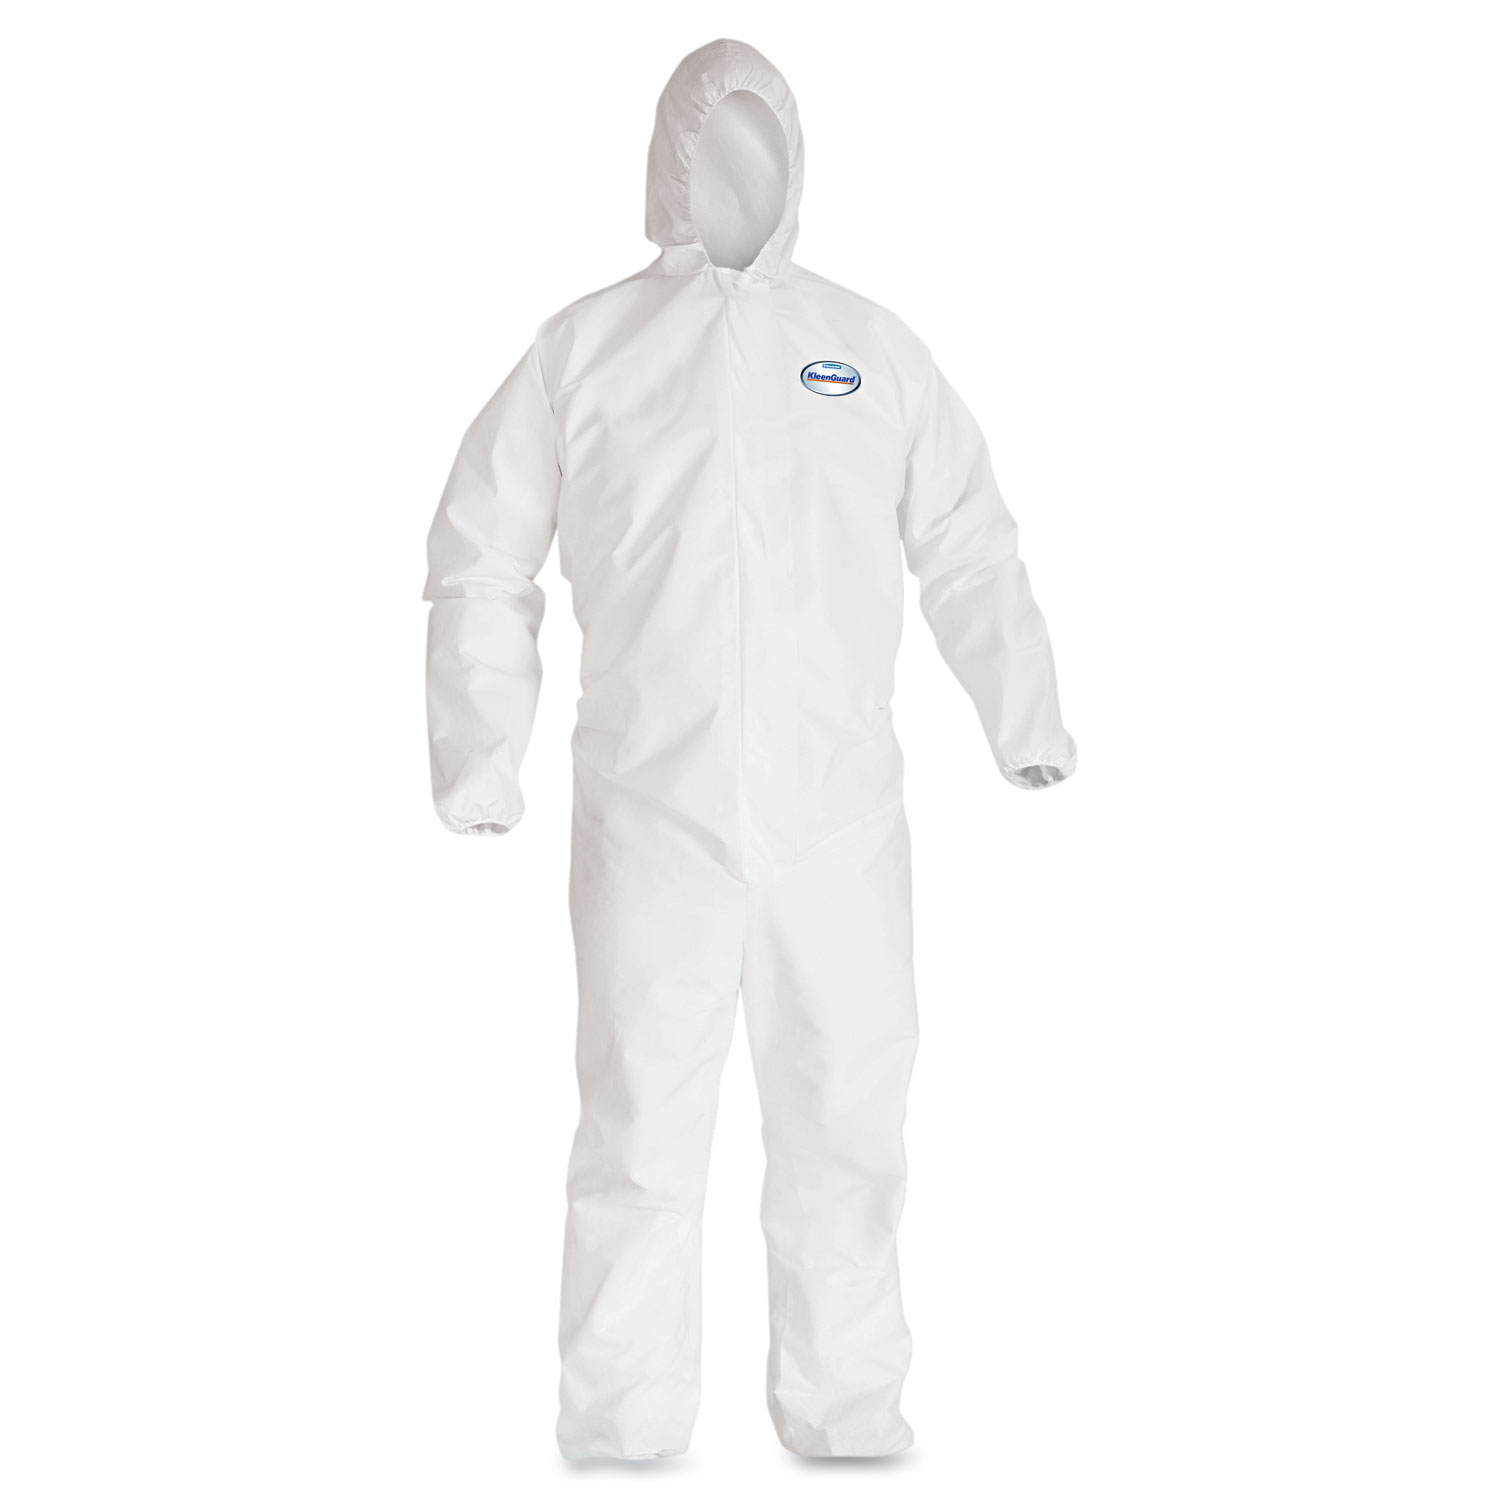 A40 Elastic-Cuff and Ankles Hooded Coveralls, White, X-Large, 25/Case